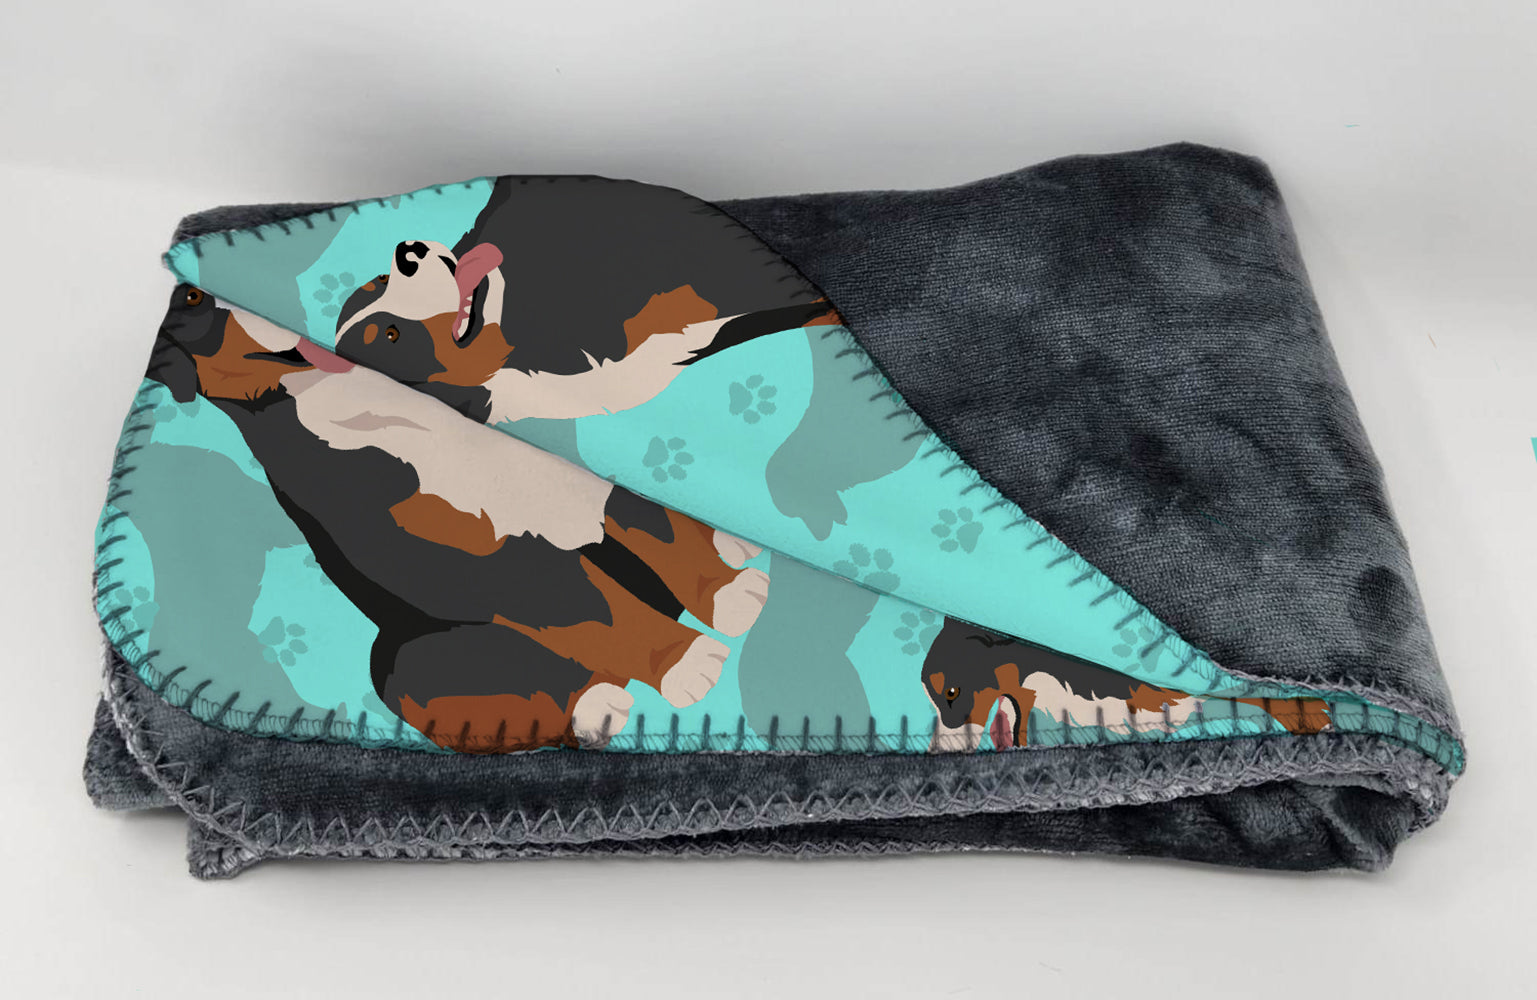 Buy this Bernese Mountain Dog Soft Travel Blanket with Bag